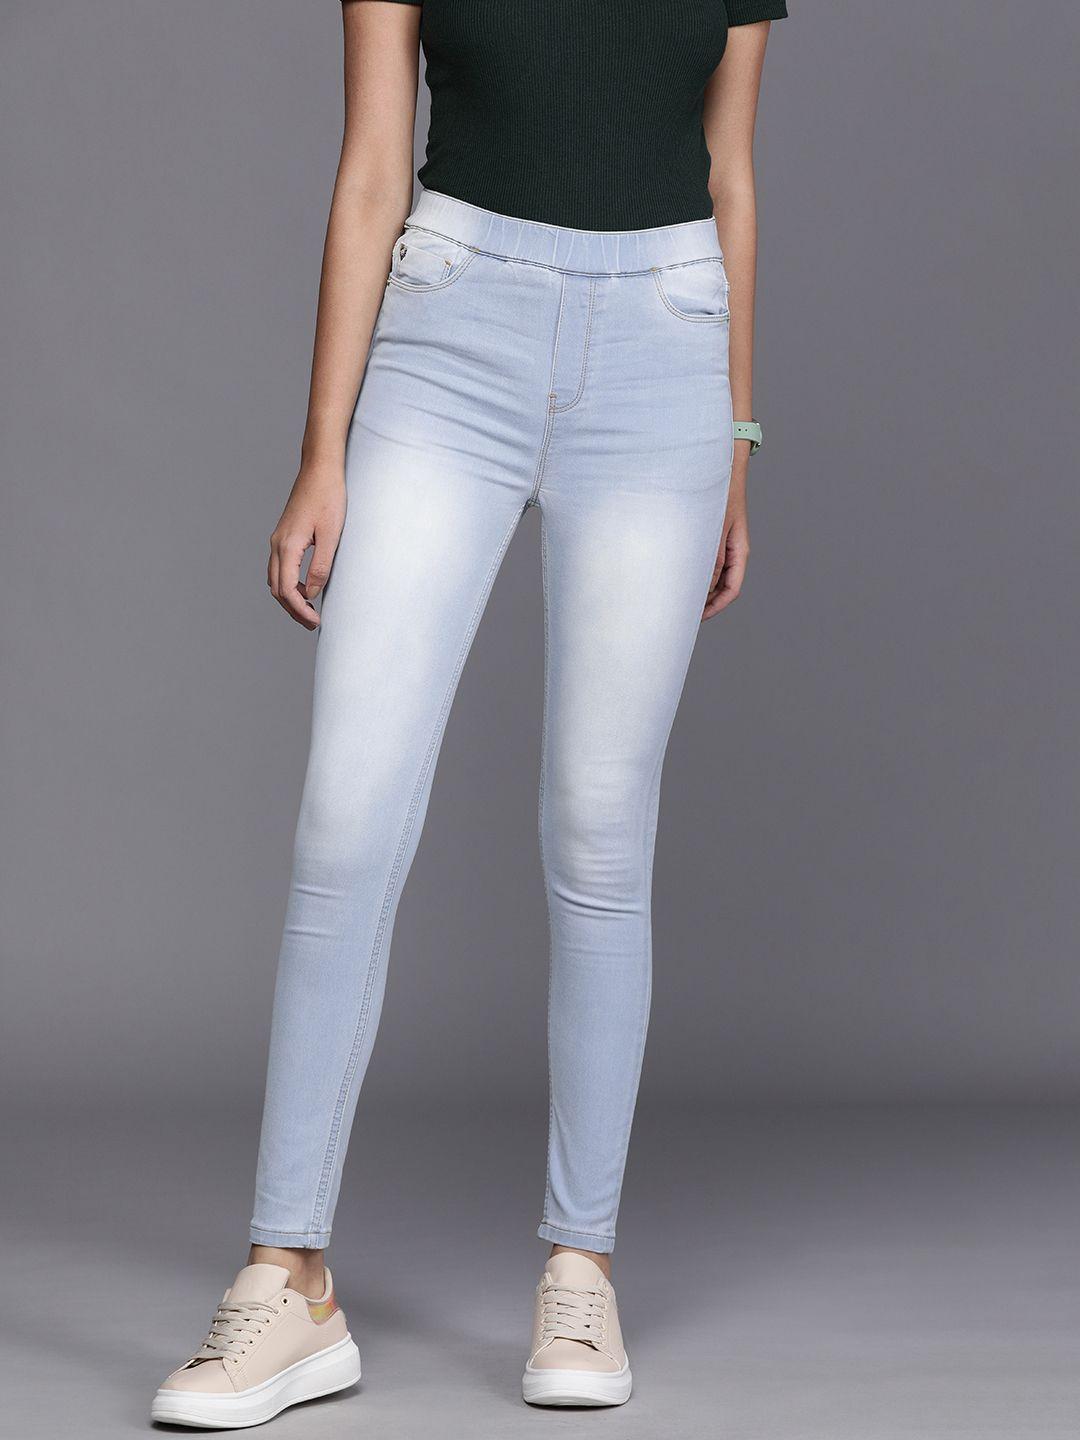 allen-solly-woman-blue-jane-super-skinny-fit-light-faded-high-rise-jeggings